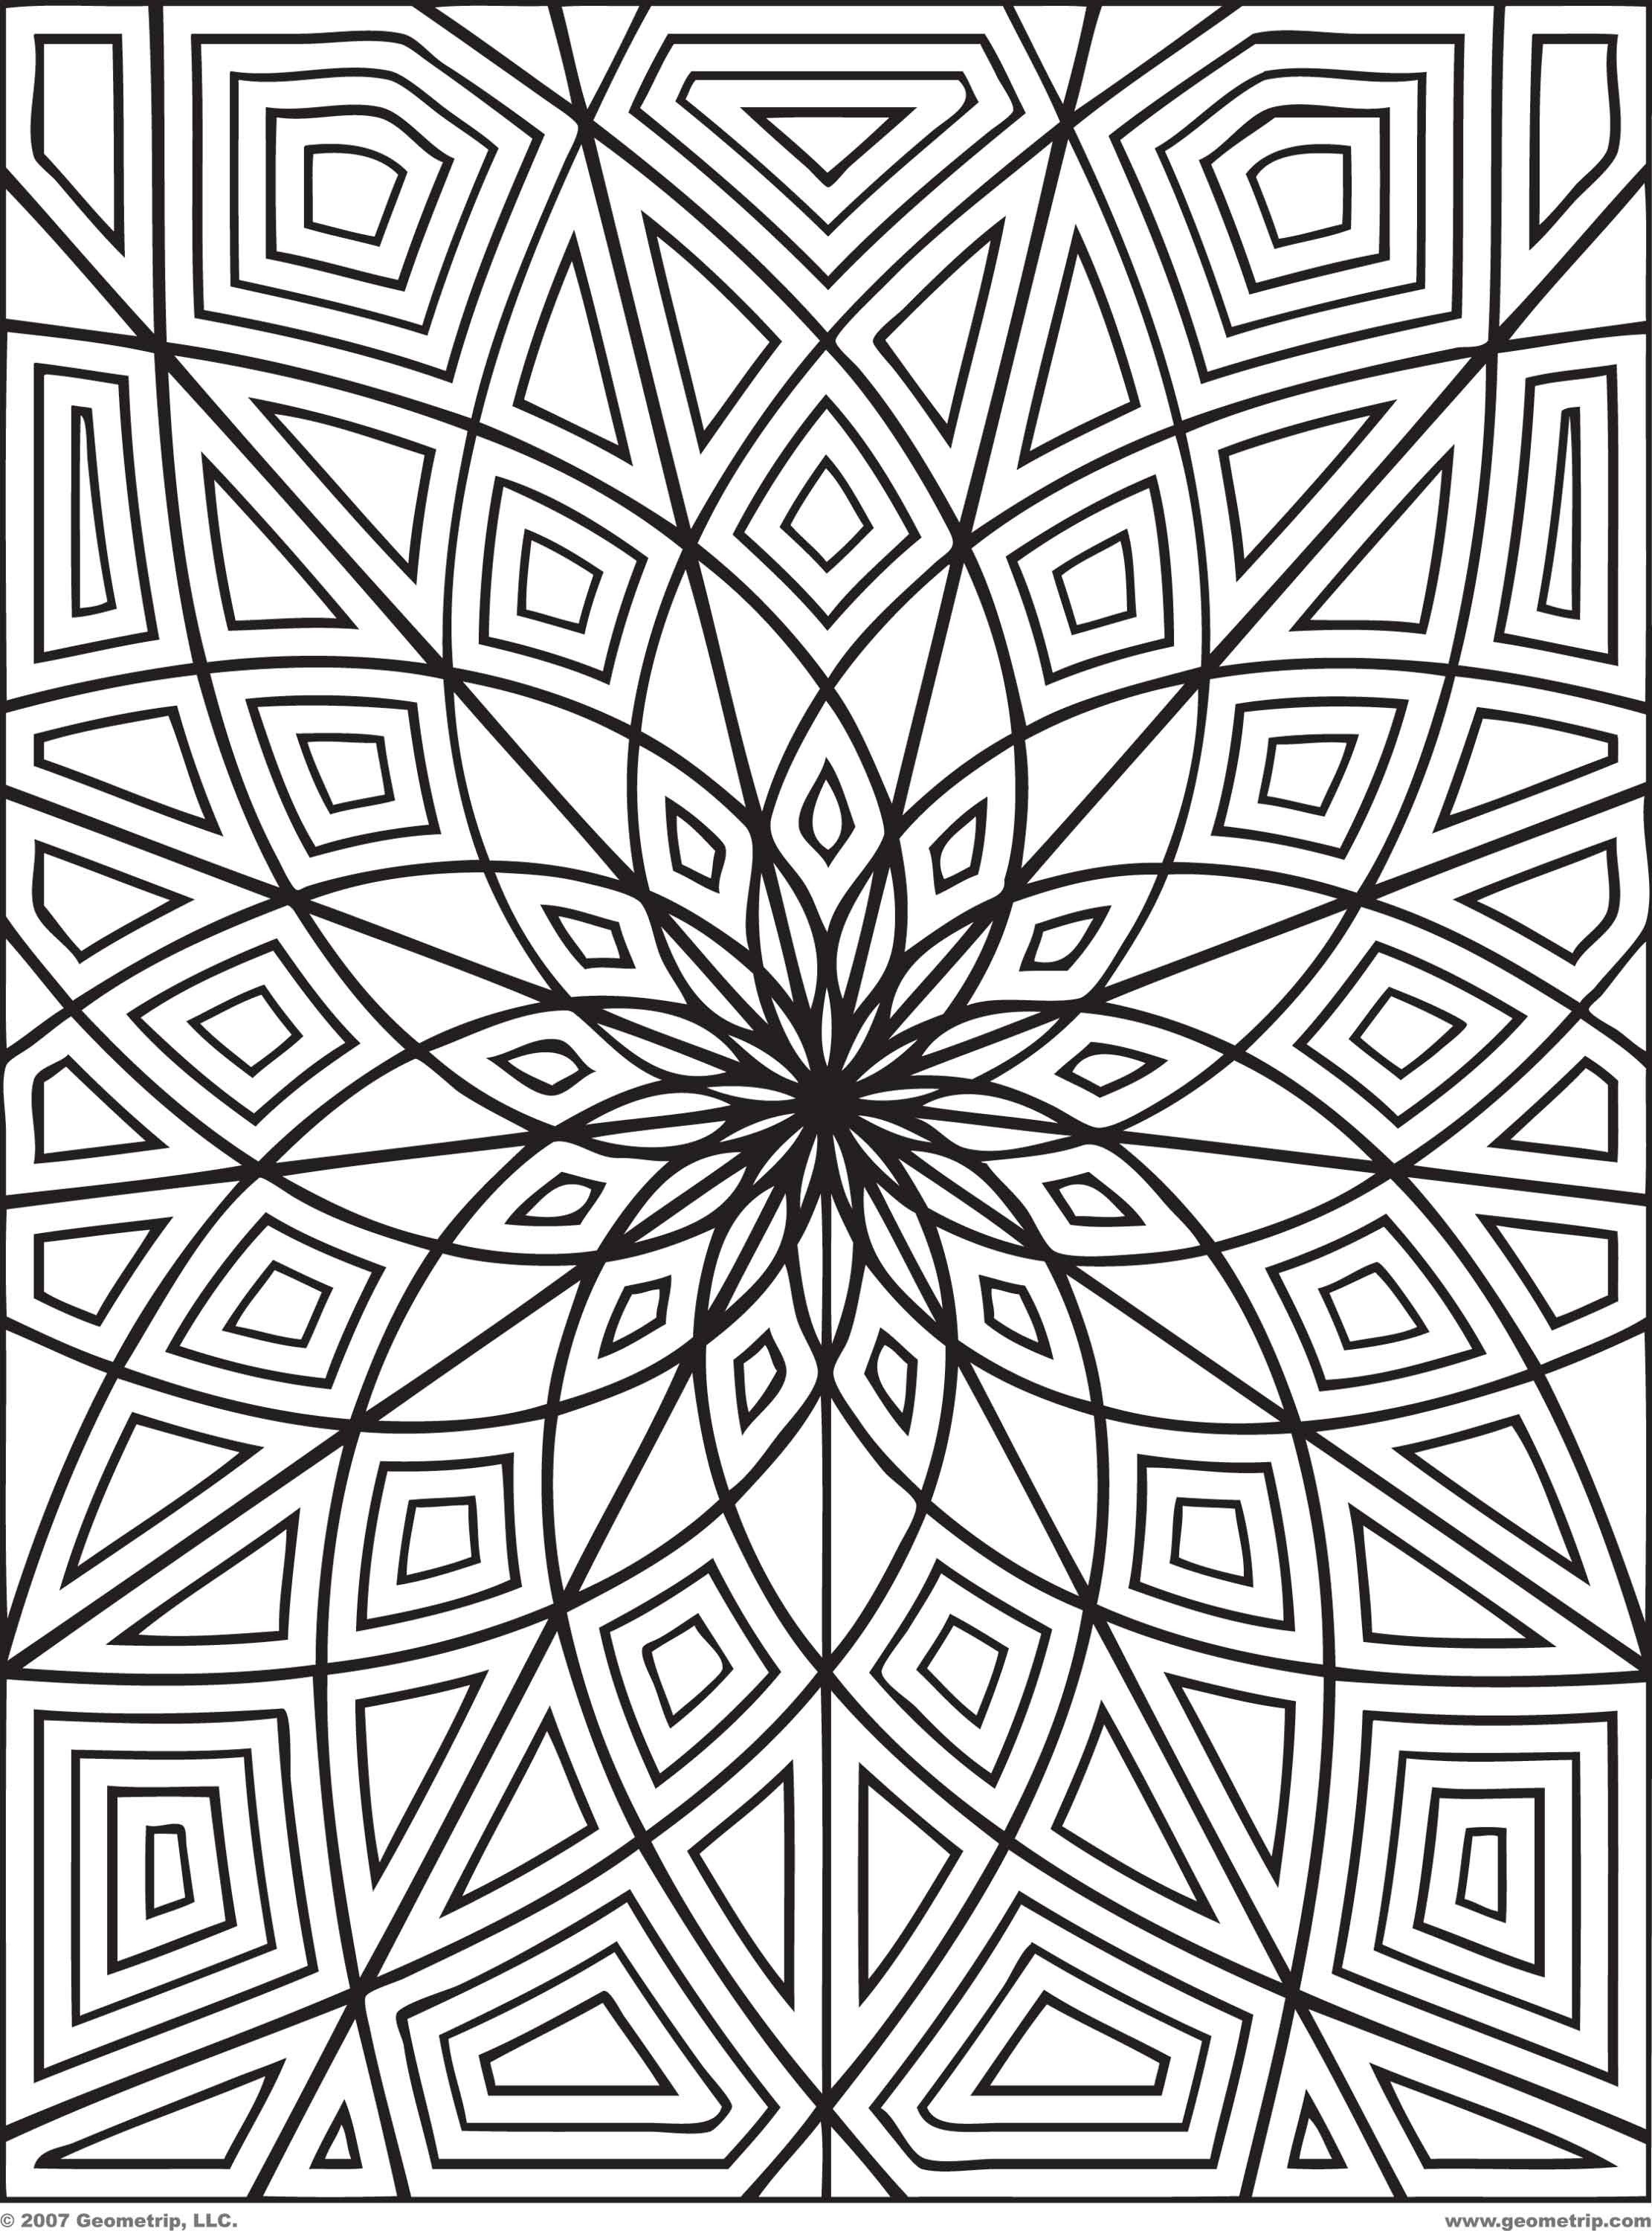 Related Cool Coloring Pages item-16031, Coloring Pages To Print ...